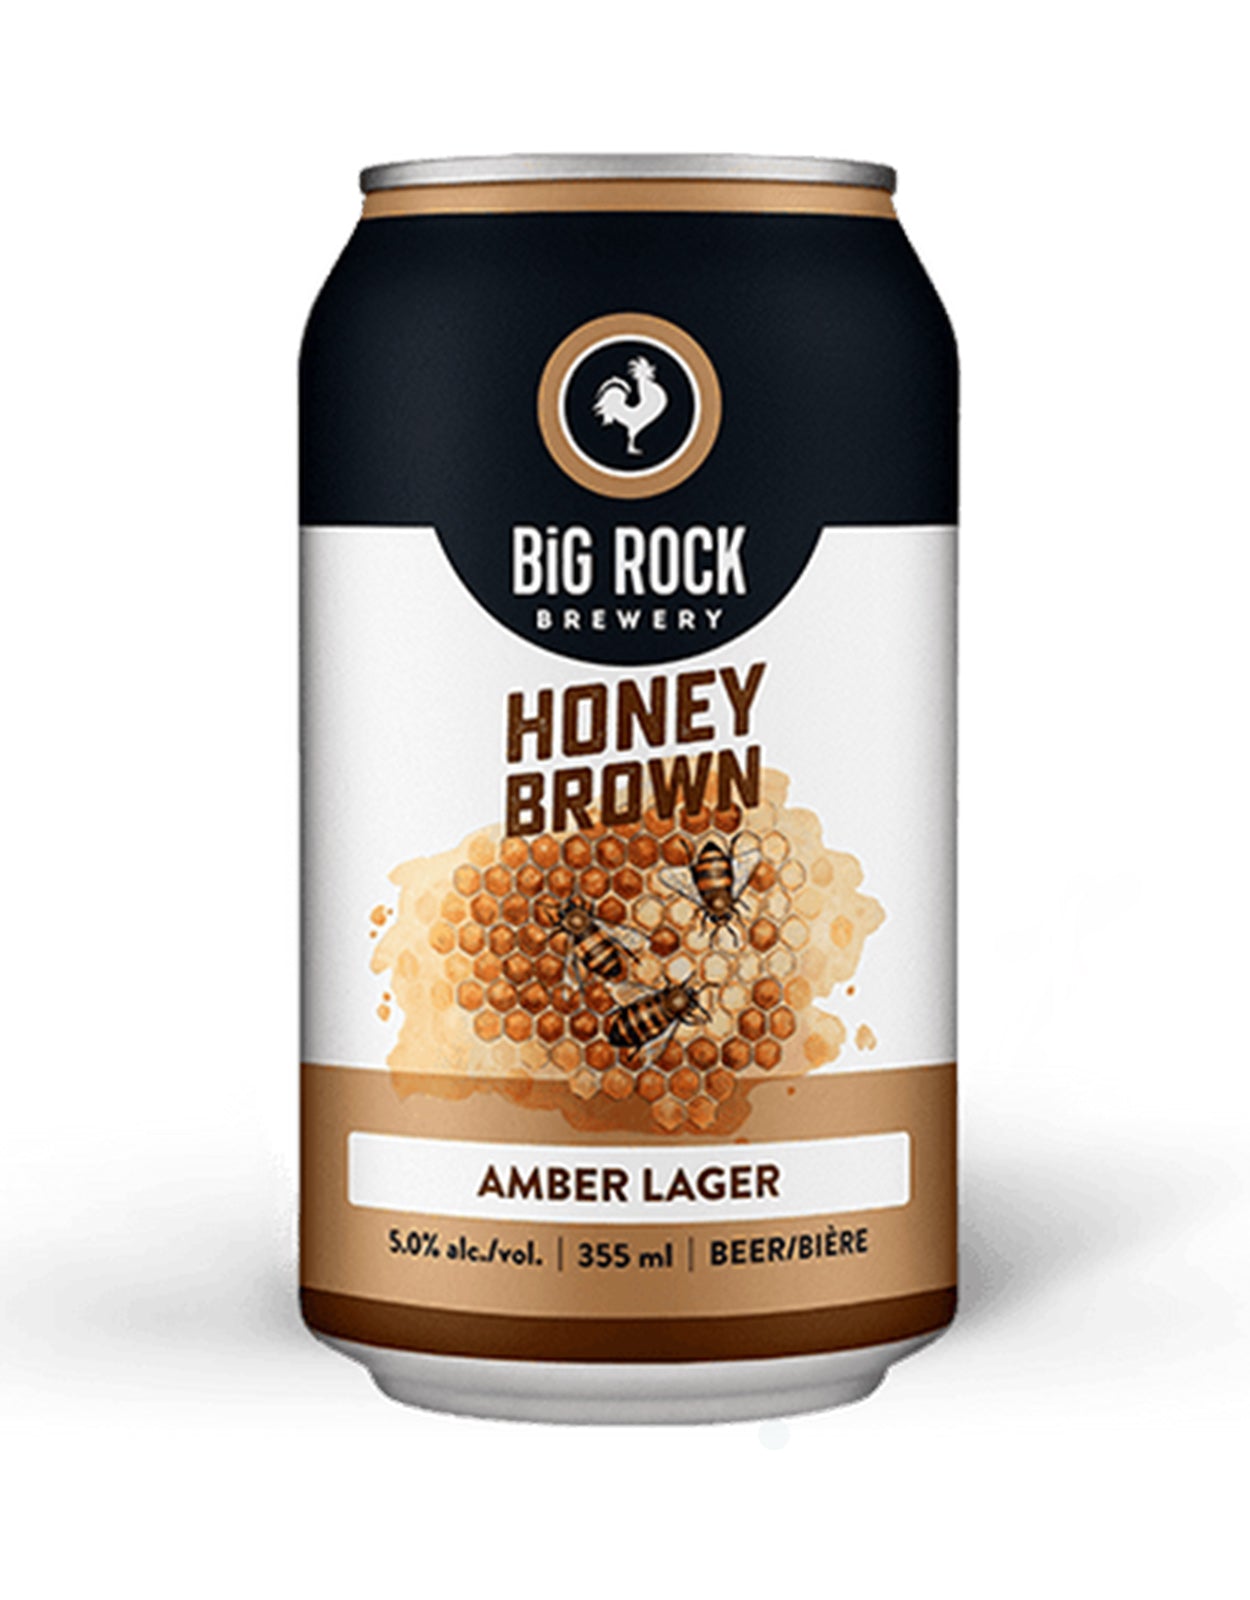 Big Rock Honey Brown Amber Lager 355 ml - 12 Cans